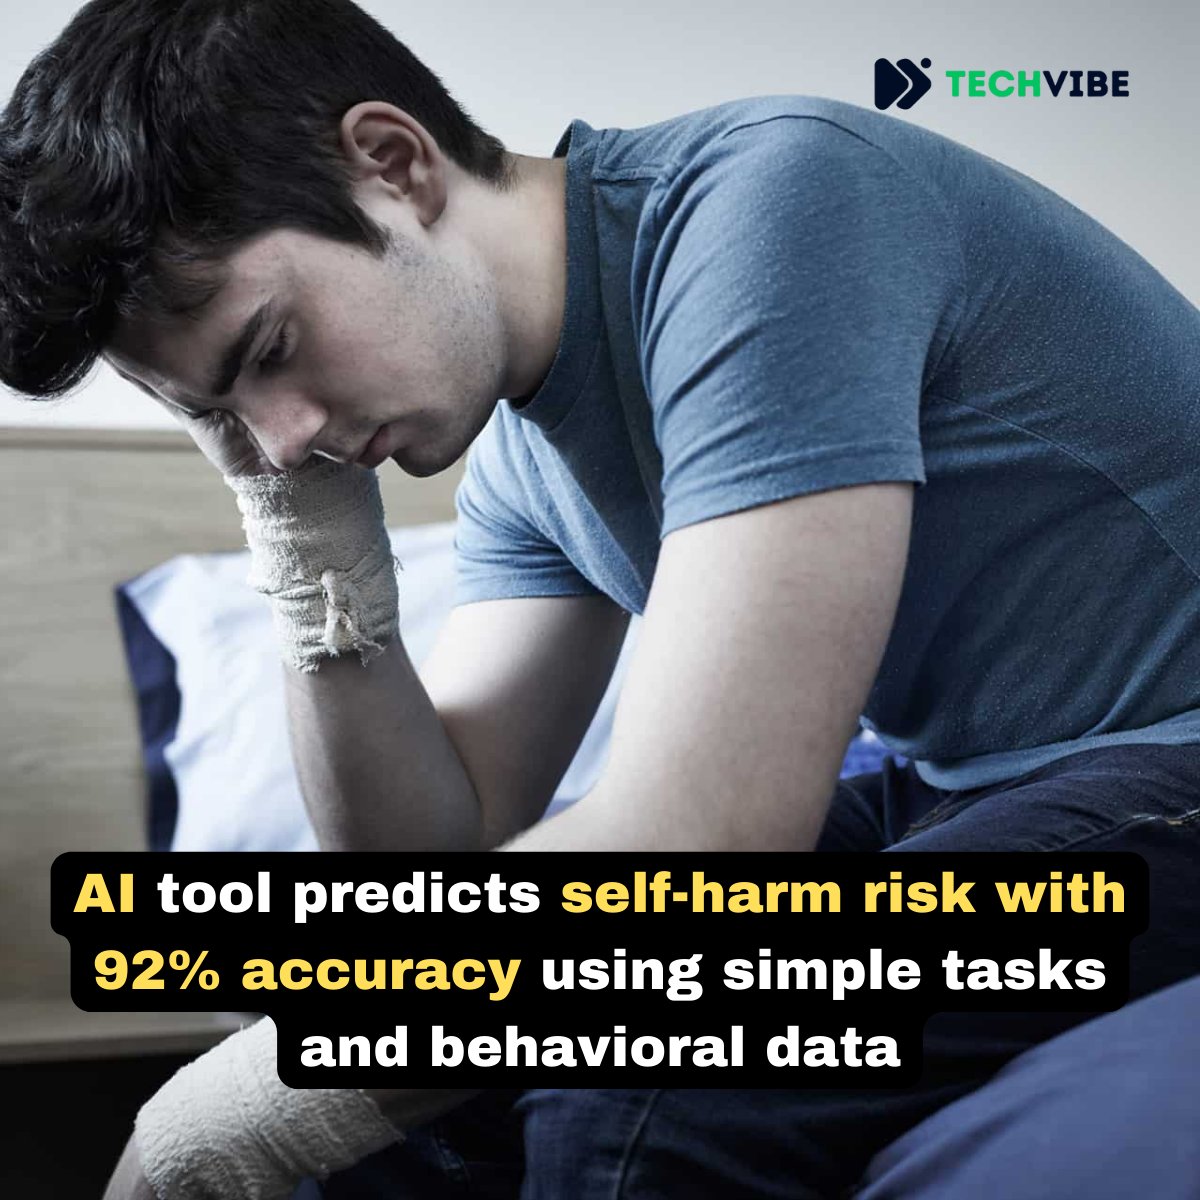 Cutting-edge AI tool, developed by Northwestern University researchers, predicts self-harm risk with 92% accuracy by analyzing simple tasks and behavioral data, potentially revolutionizing mental health assessments. more: t.ly/9D7H5 #AI #AInews #AItool